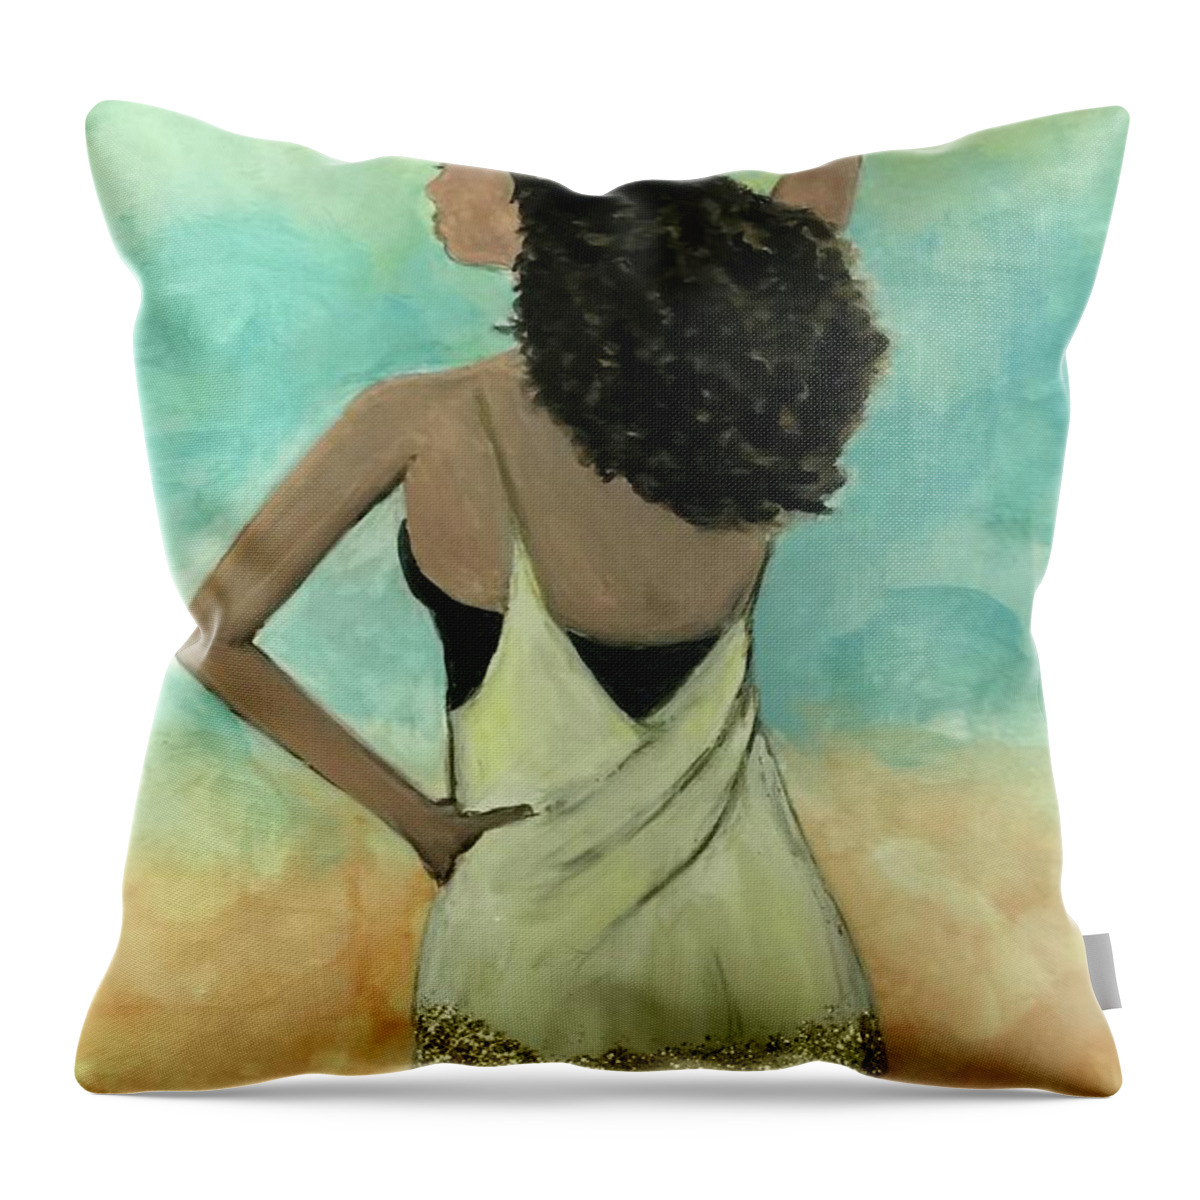 Watercolor Throw Pillow featuring the painting Day Off by Yolanda Holmon